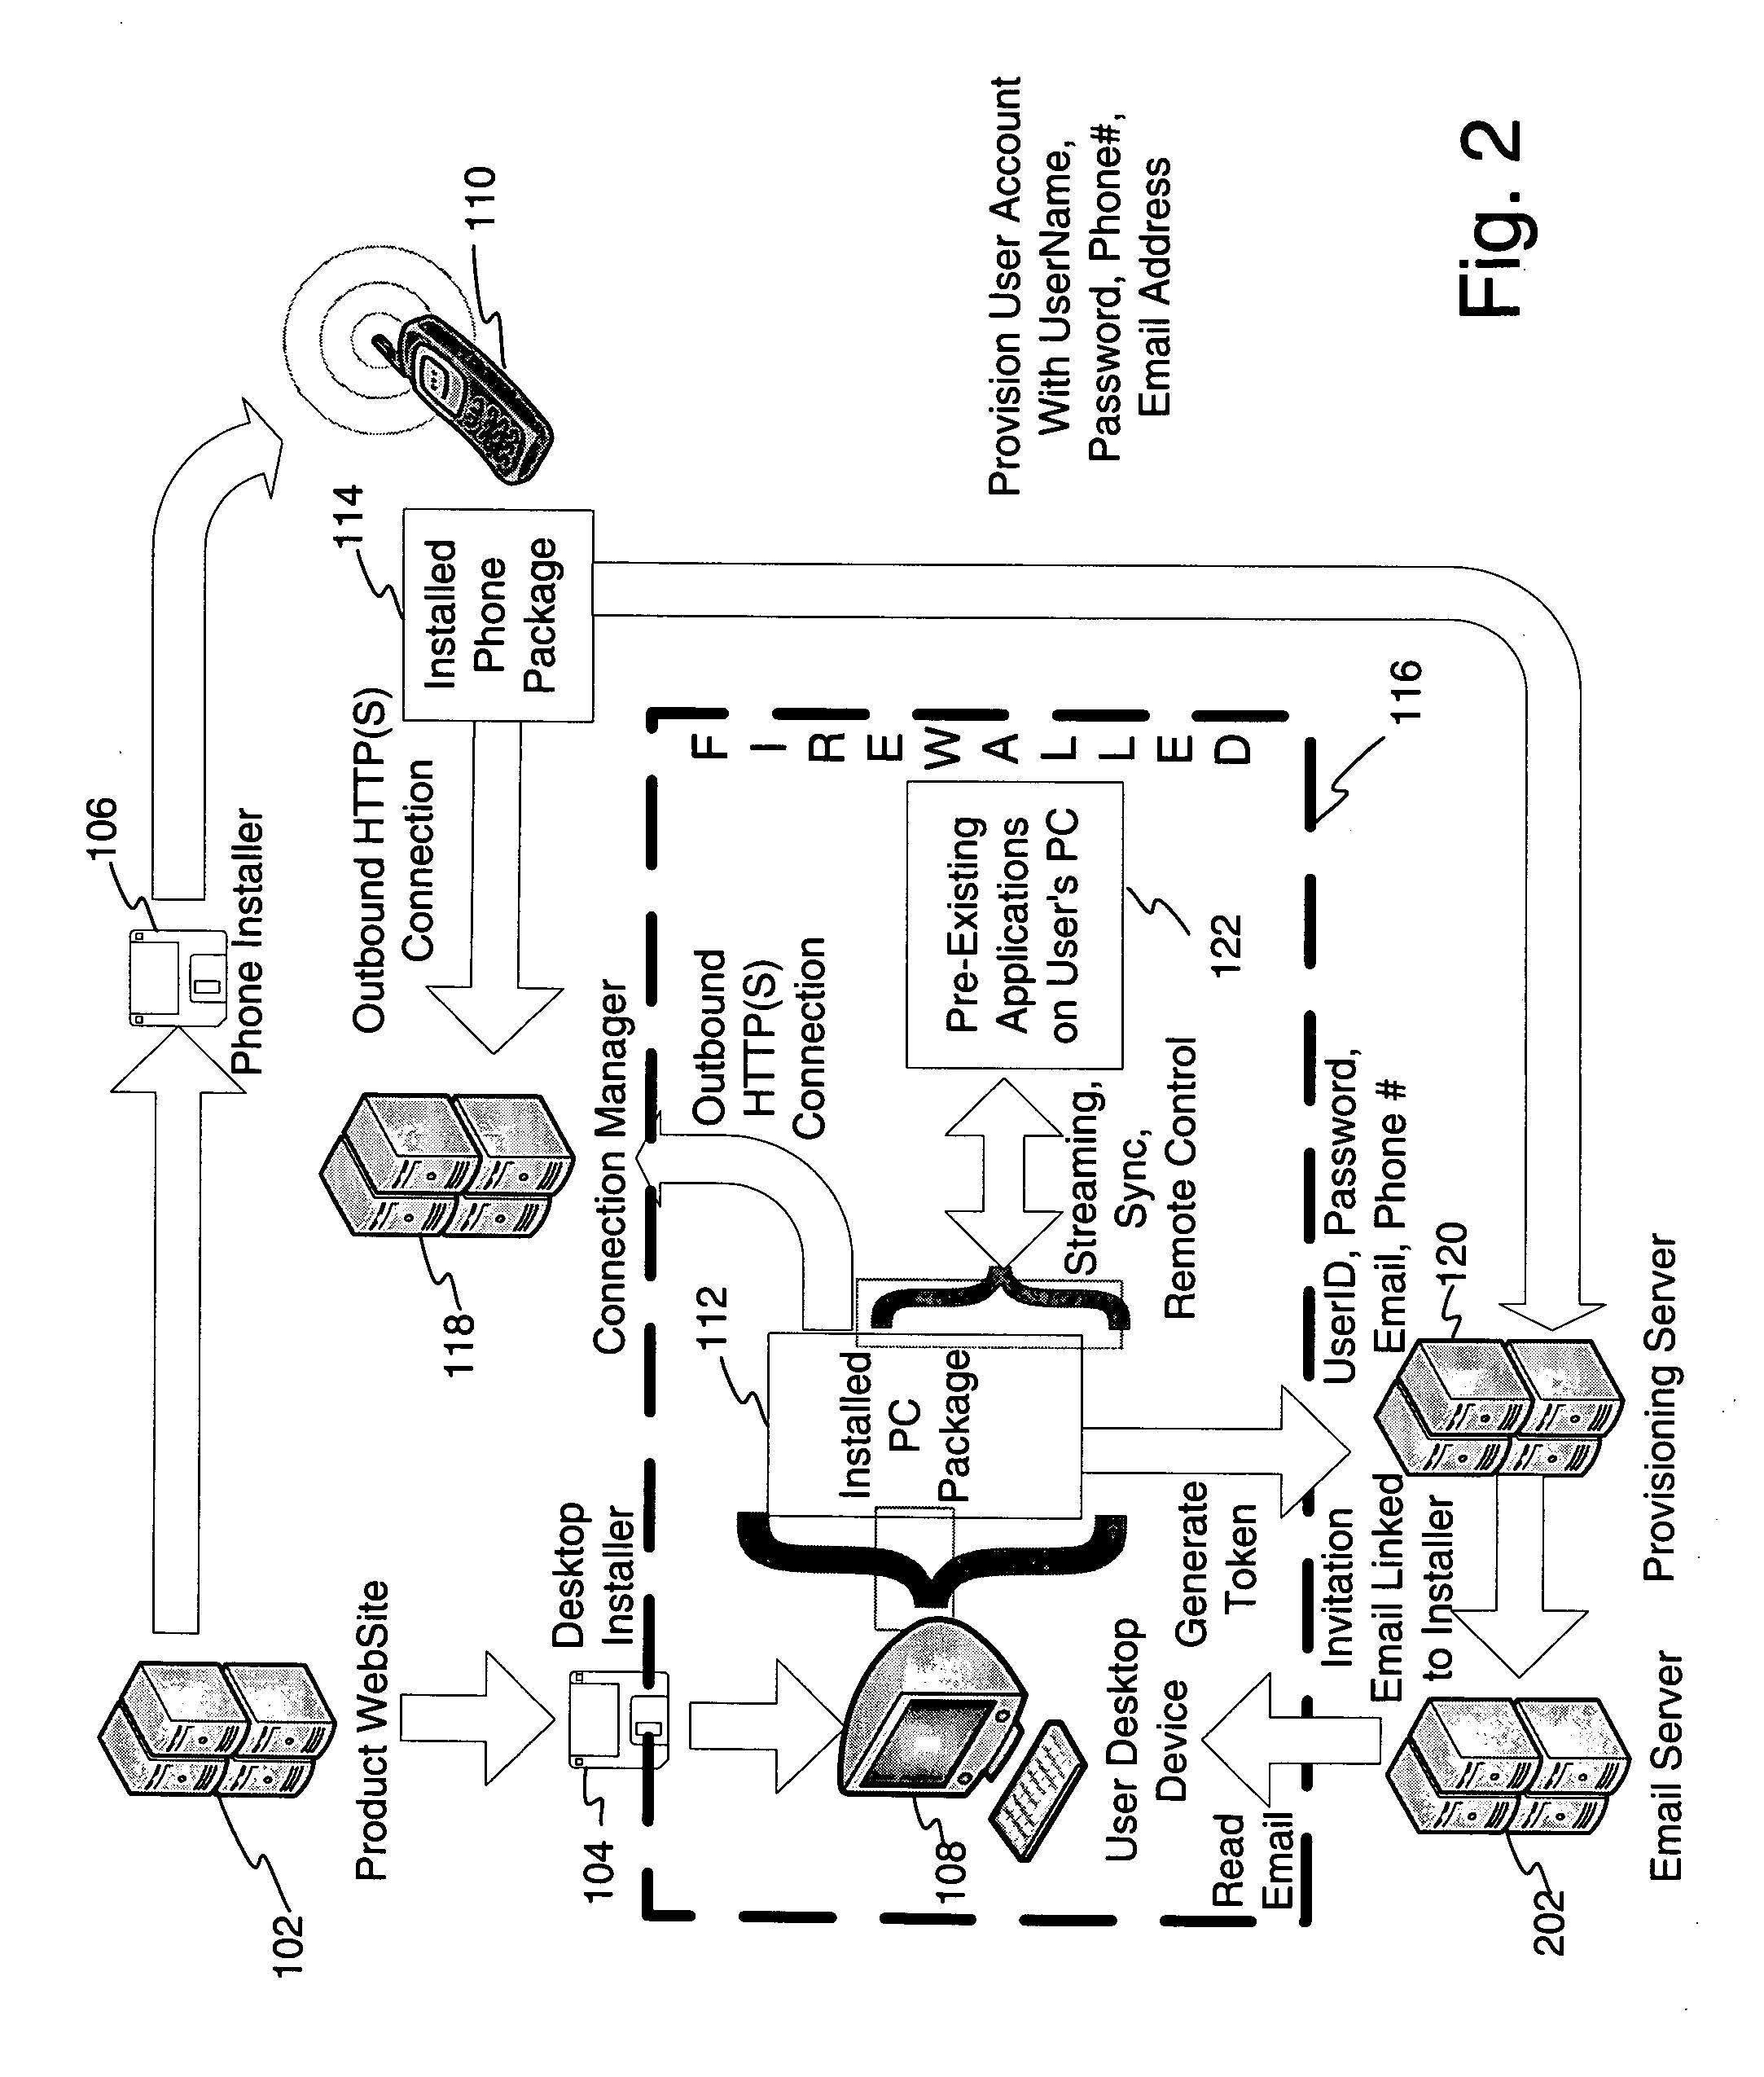 System and method for providing mobile access to personal media